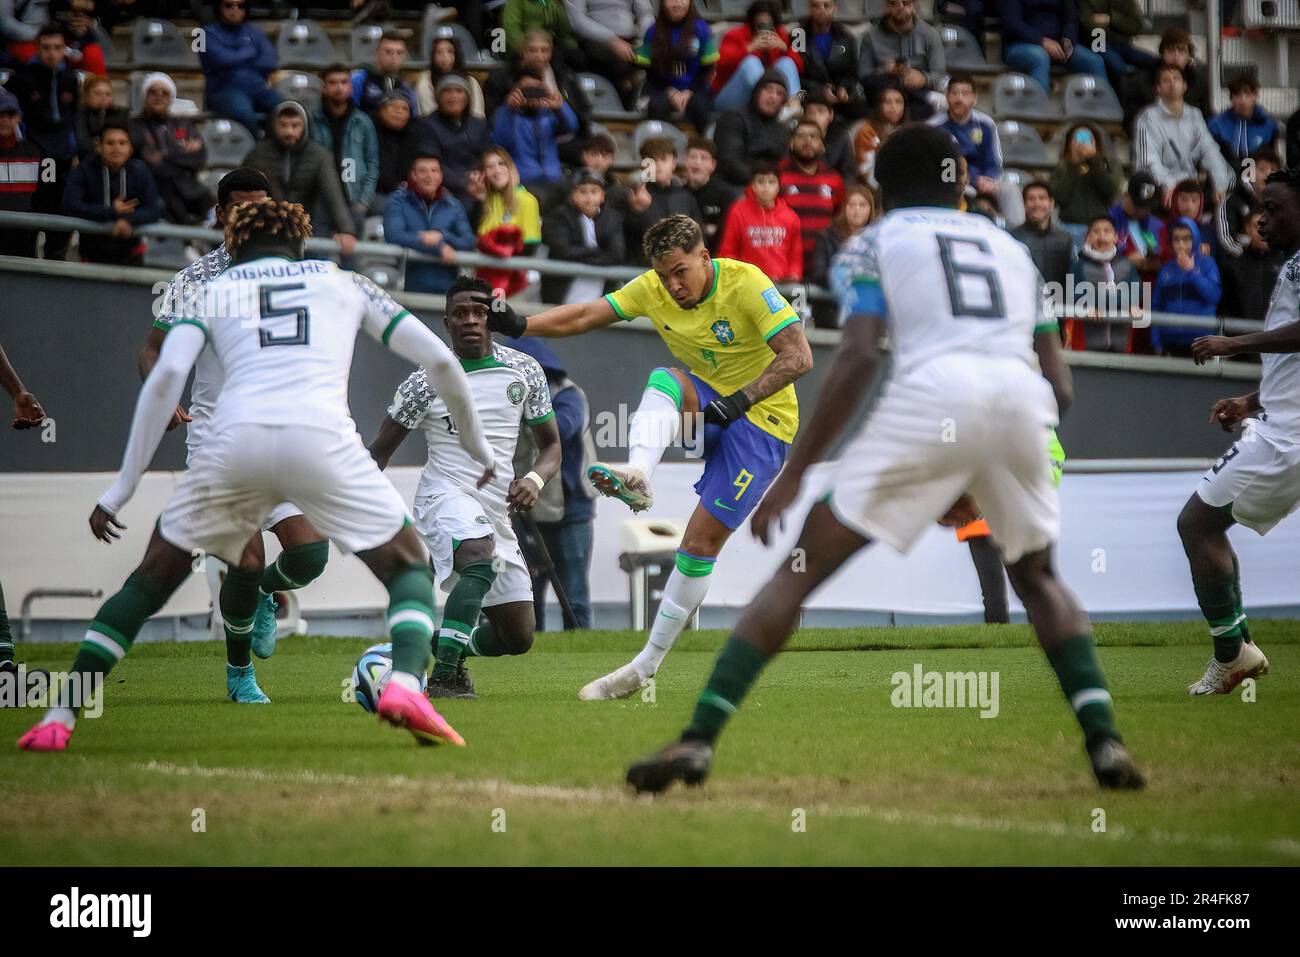 La Plata, Argentina. 27th May, 2023. Abl Ogwuche (L), Daniel Bameyi (R) of Nigeria and Marcos Leonardo of Brasil (C) seen in action during the match between Brasil vs Nigeria as part of World Cup u20 Argentina 2023 - Group D at Estadio Unico 'Diego Armando Maradona'. Final Score: Brazil 2 - 0 Nigeria Credit: SOPA Images Limited/Alamy Live News Stock Photo